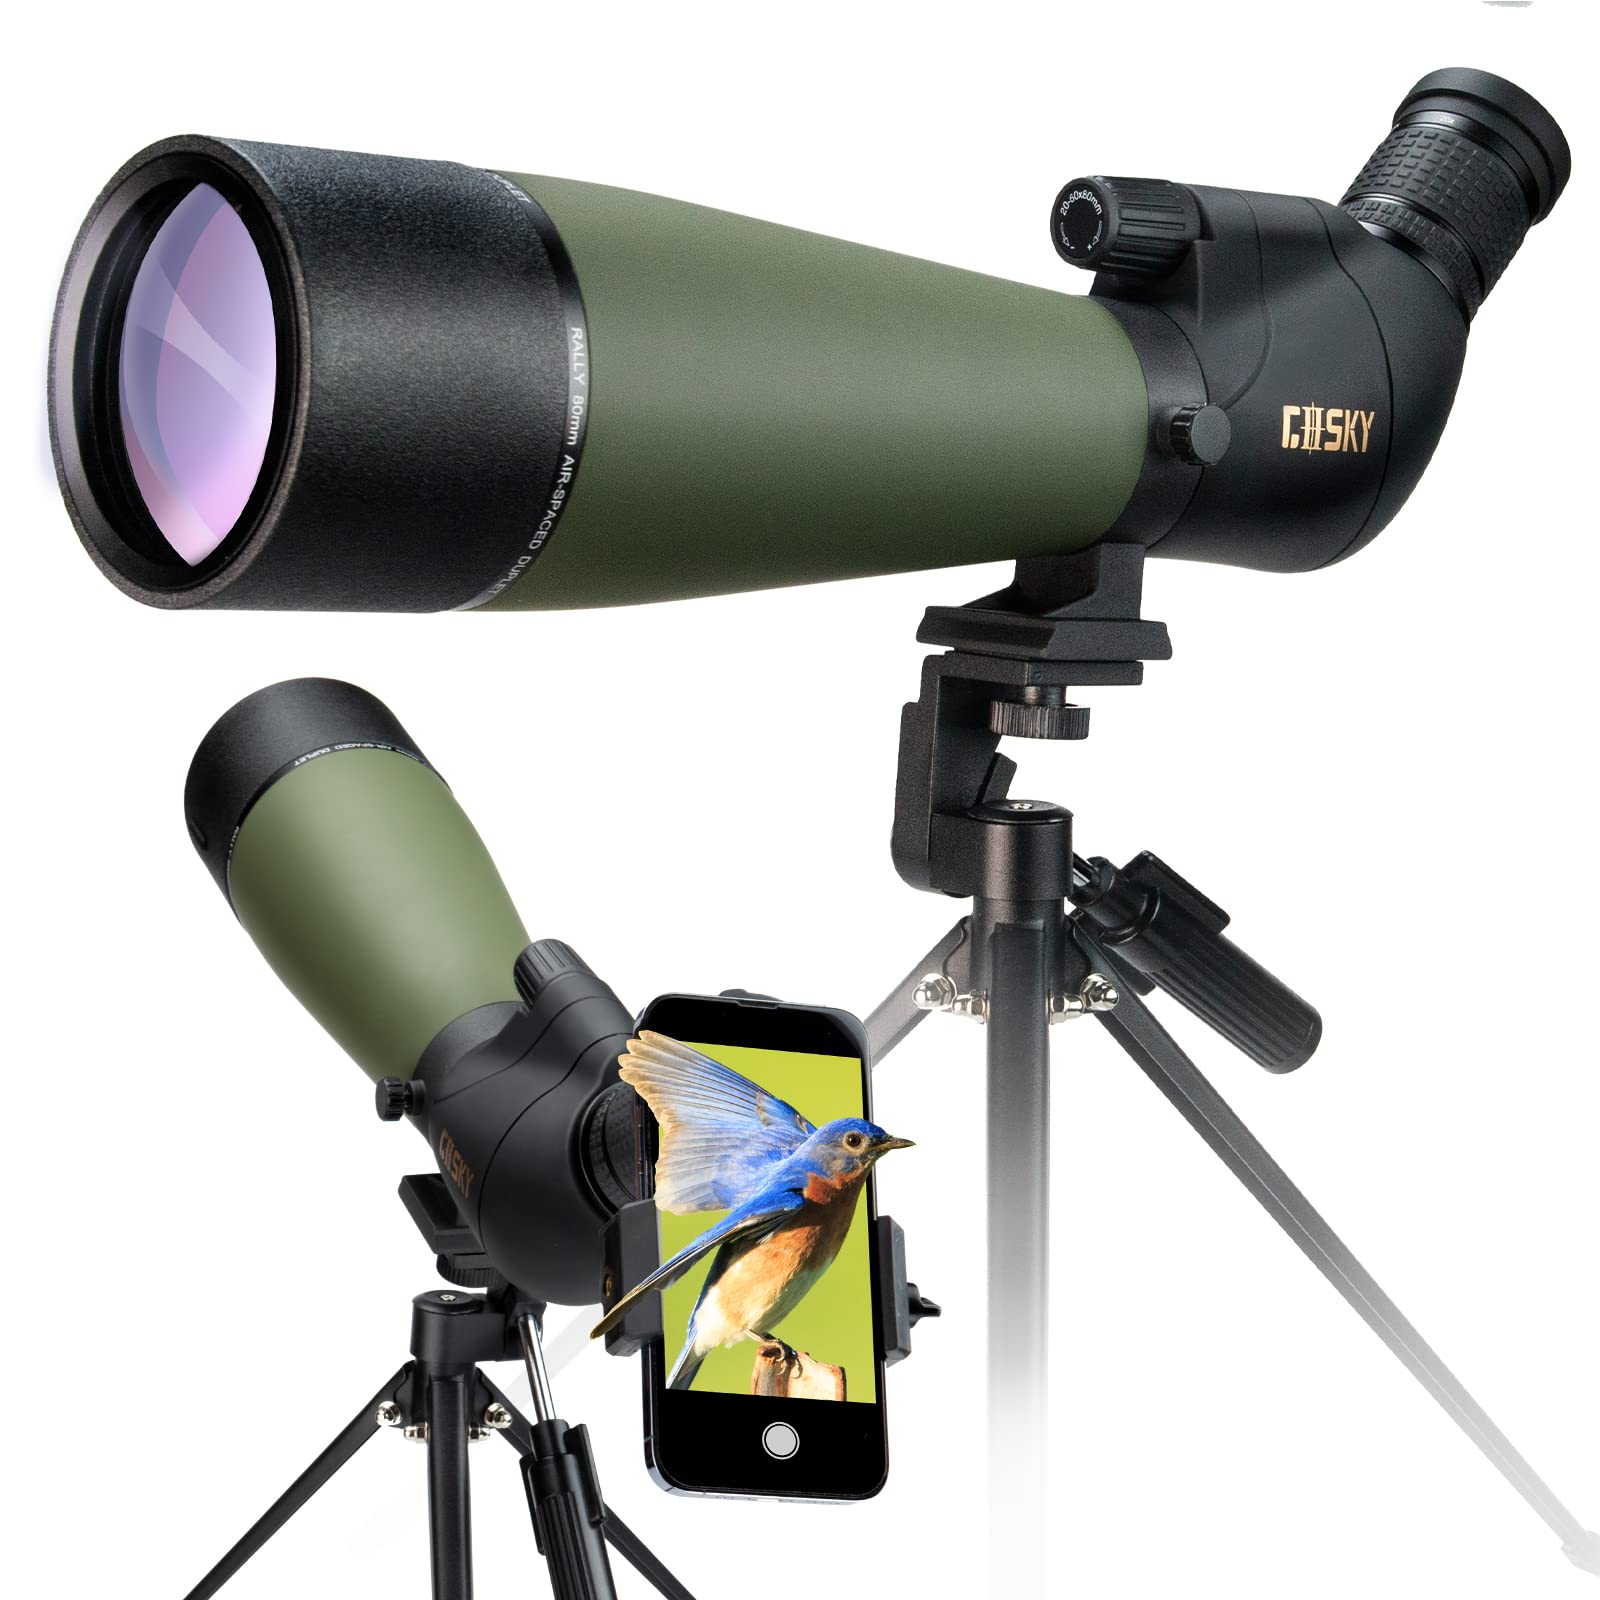 GOSKY 20-60x80 HD Spotting Scope with Tripod, Carrying Bag - BAK4 Angled Scope for Target Shooting Hunting Bird Watching Wildlif